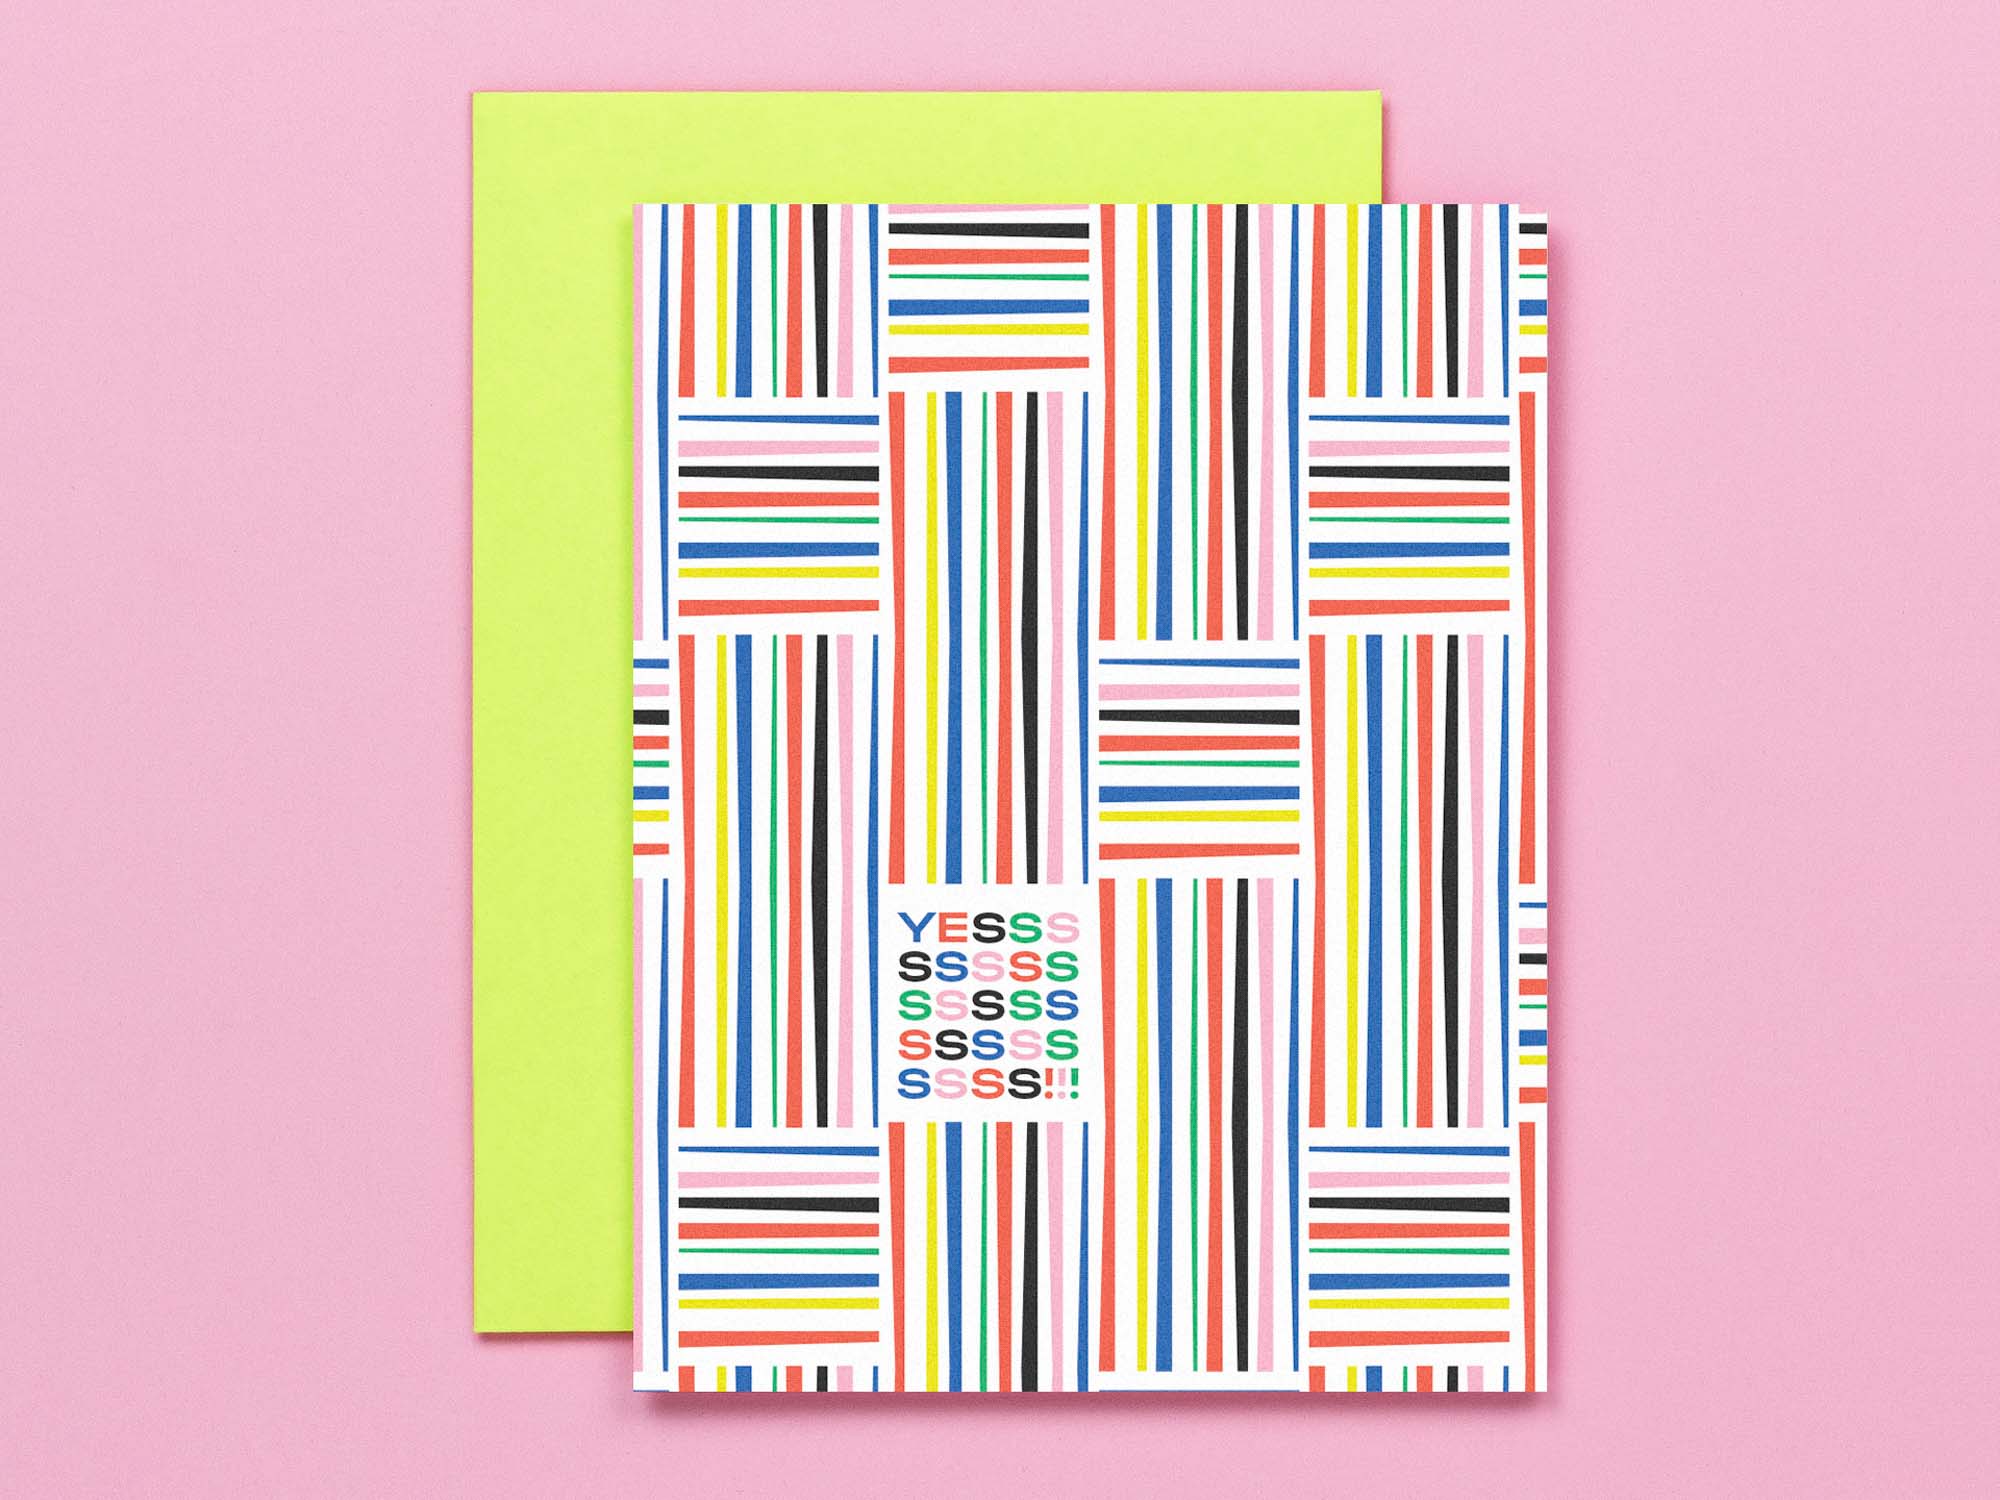 Mid-century inspired "Yessss" congrats or encouragement card with a pattern of stripes on stripes. Made in USA by @mydarlin_bk